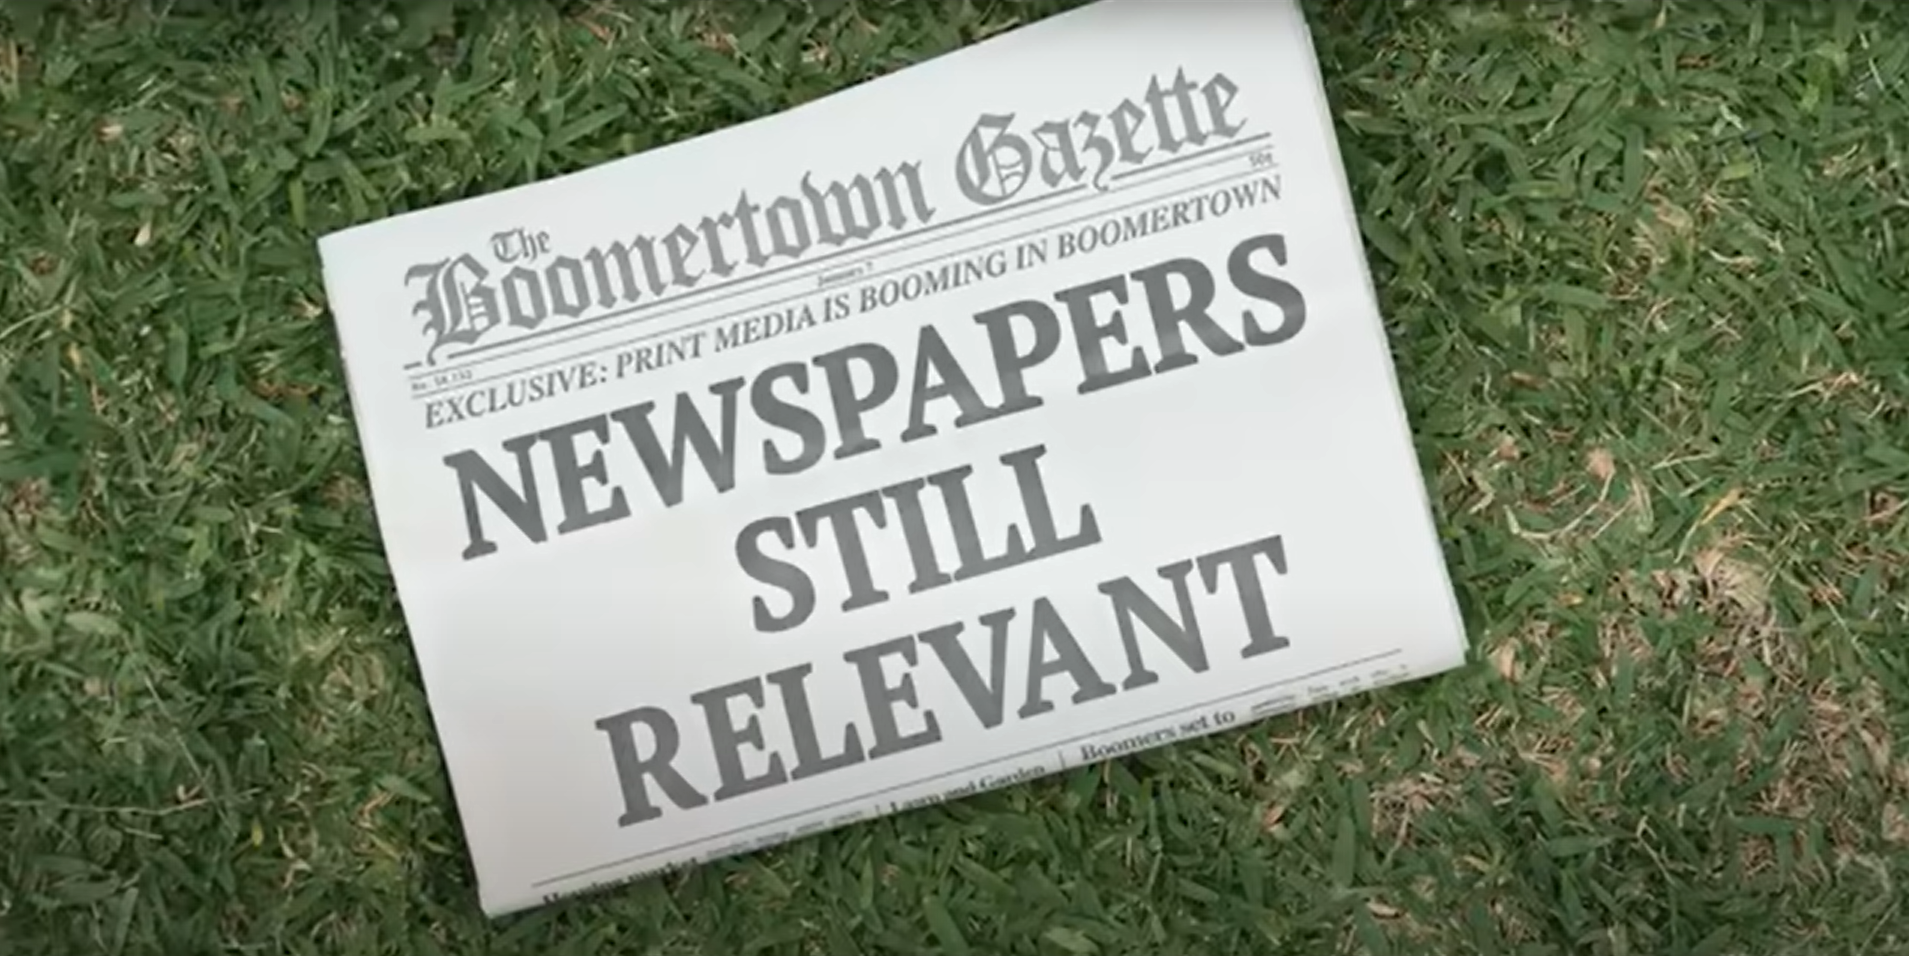 The newspaper reads: ‘Newspapers still relevant’.